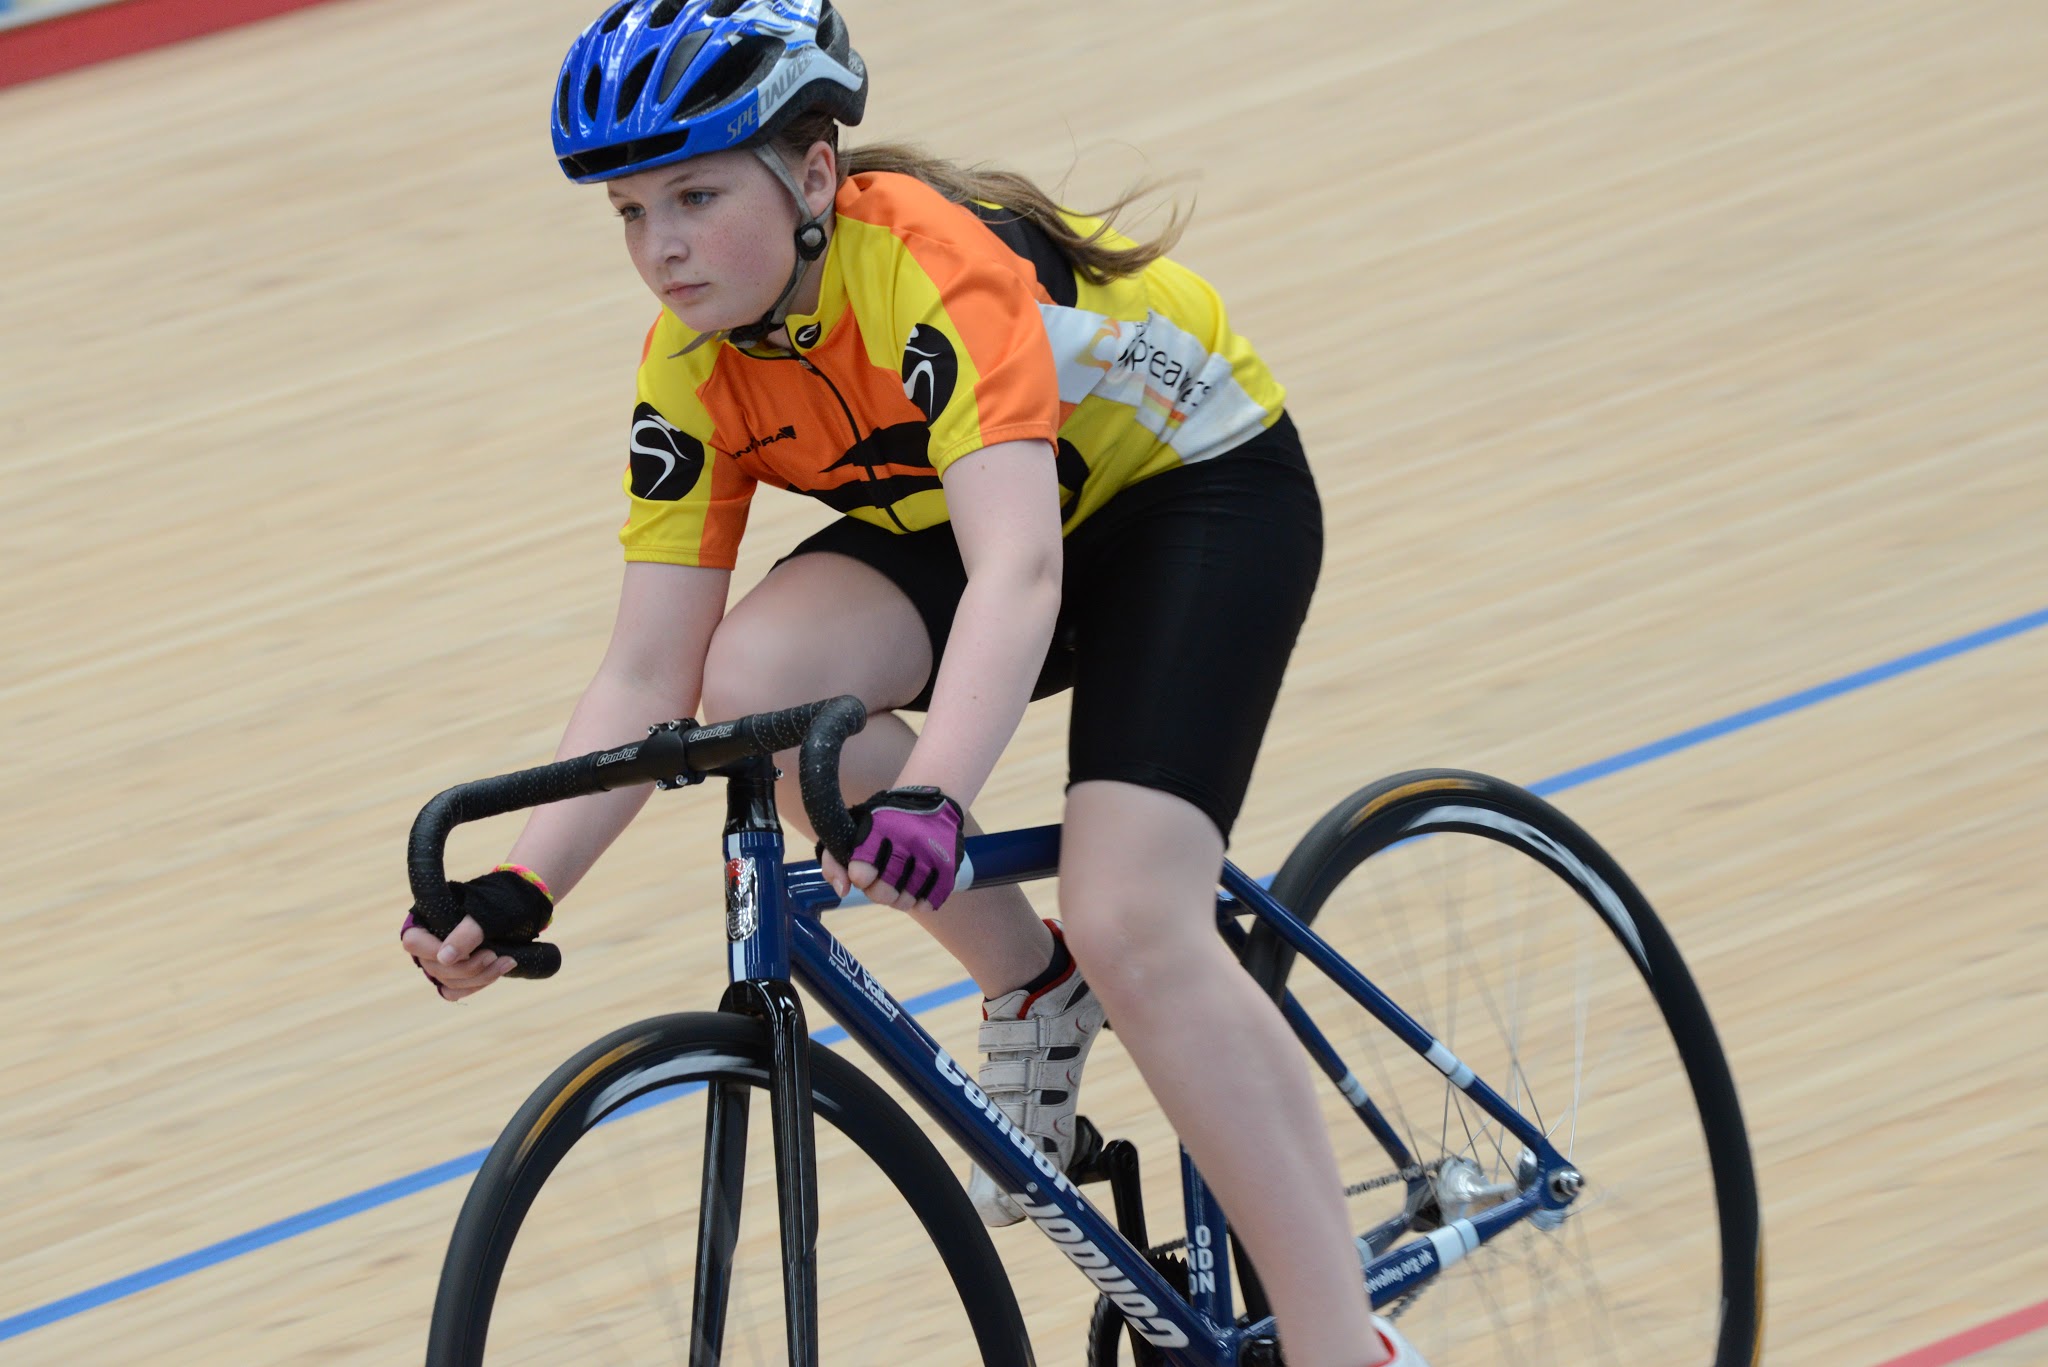 Orla in action at Lee Valley Velo